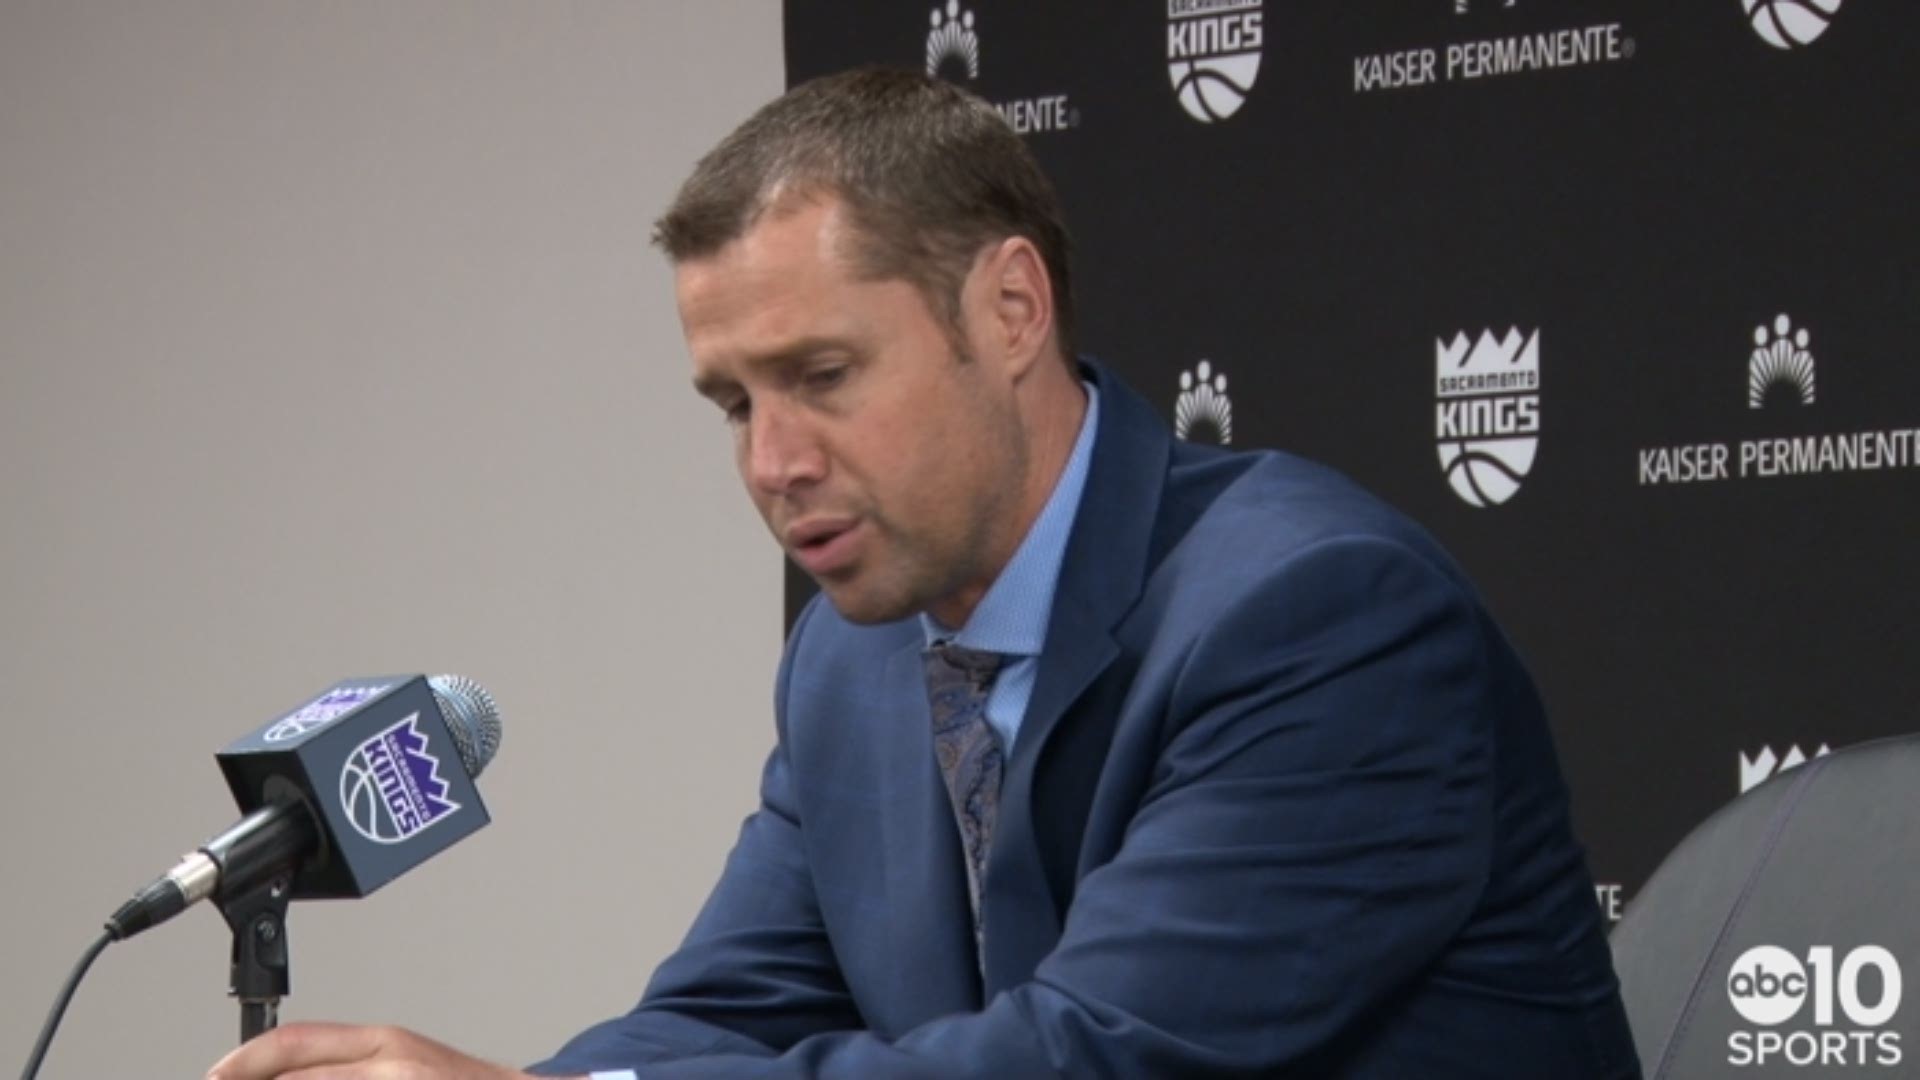 Sacramento Kings head coach Dave Joerger breaks down the season finale victory over the Houston Rockets, giving Vince Carter a curtain call and looks ahead to the team's future